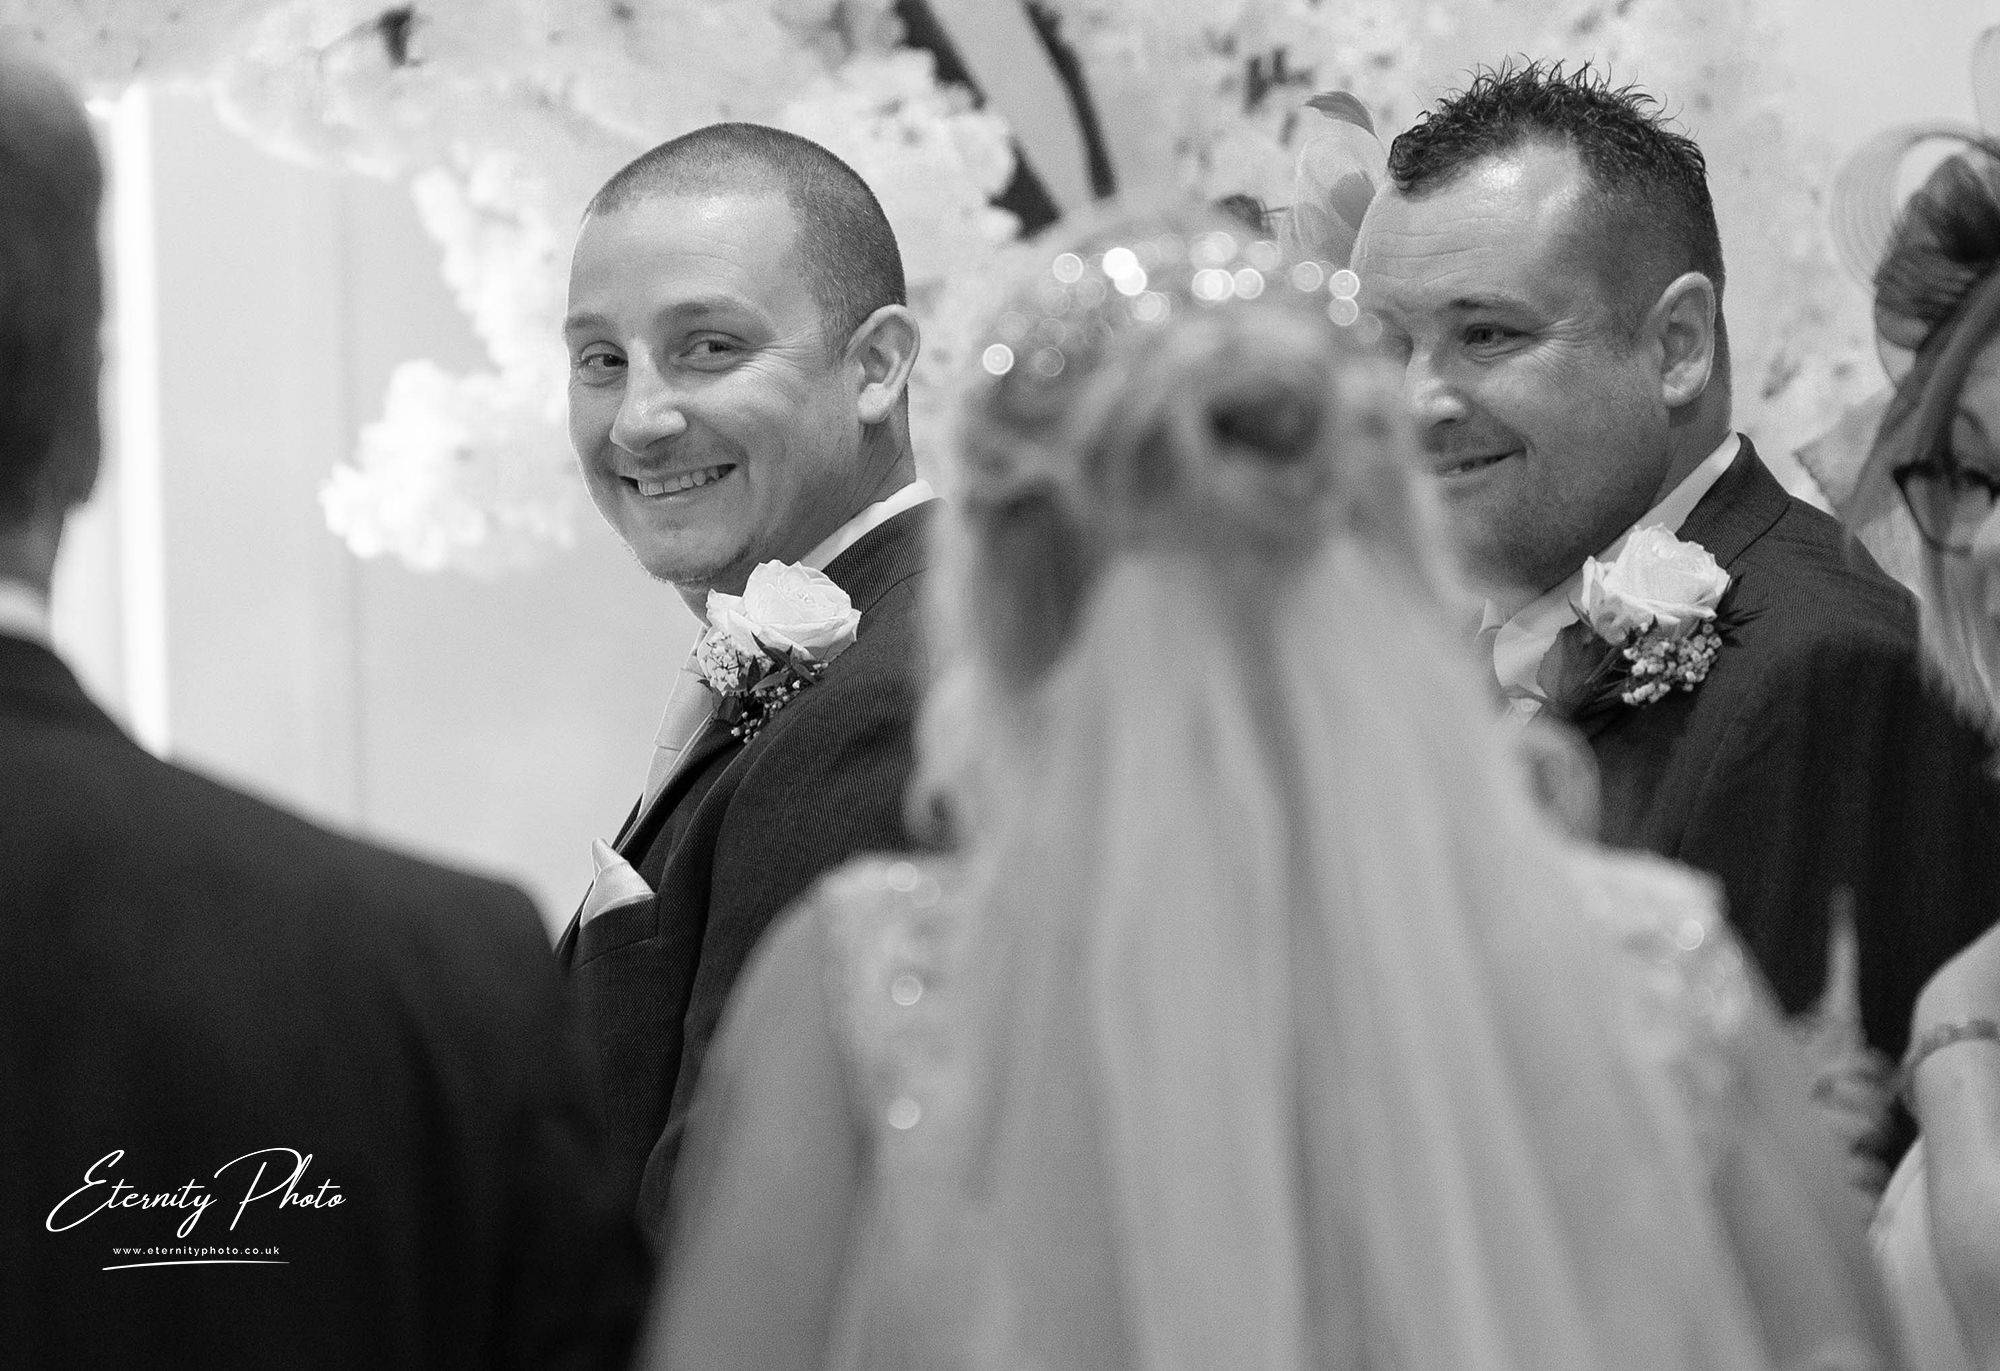 Smiling grooms at wedding ceremony in black and white.